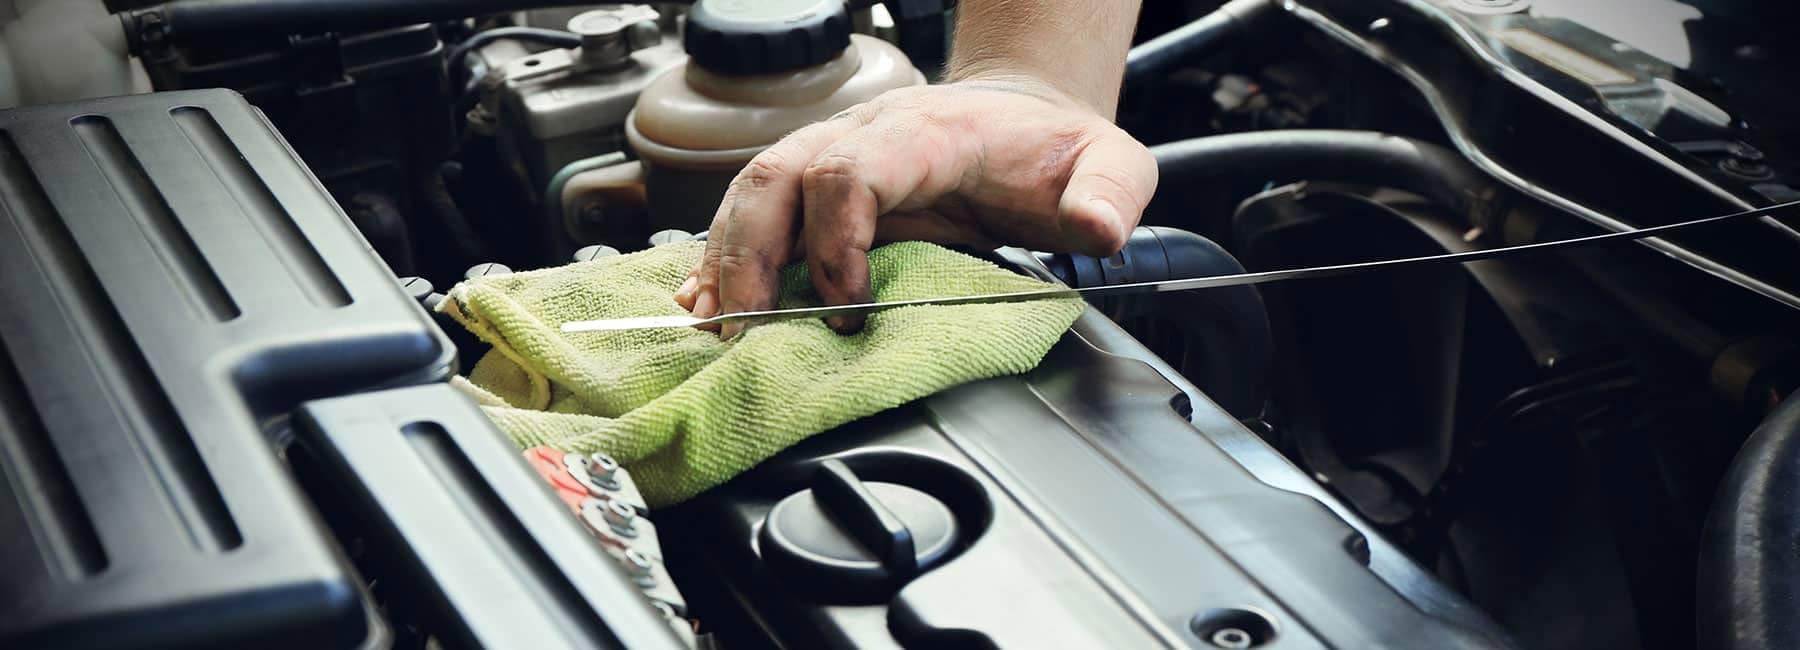 Auto mechanic changing the oil of a vehicle